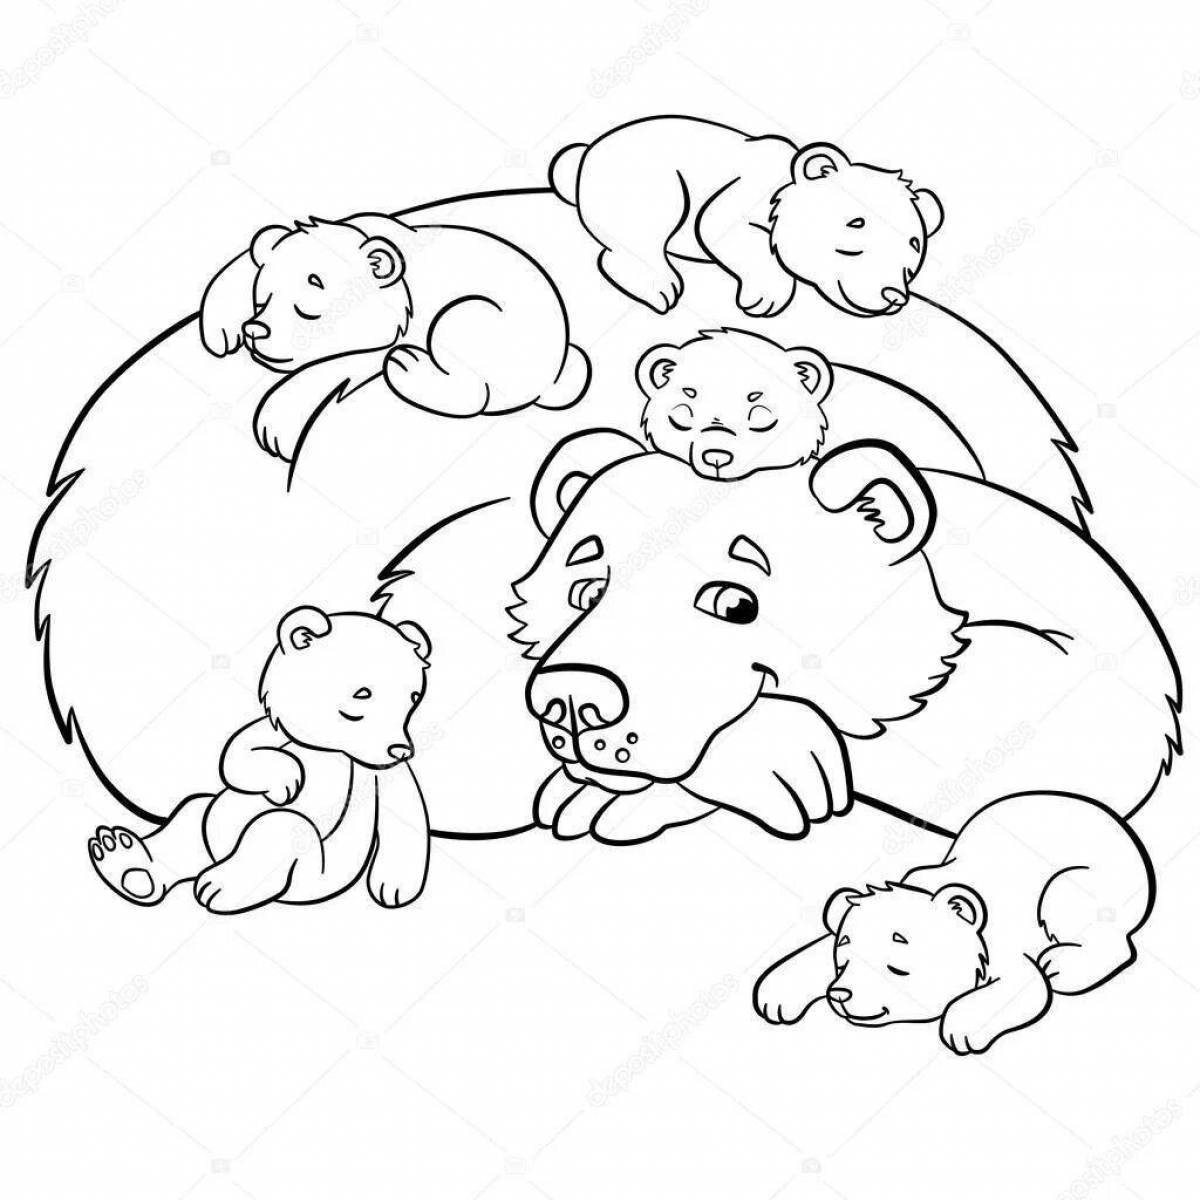 Coloring page funny teddy bear with cubs